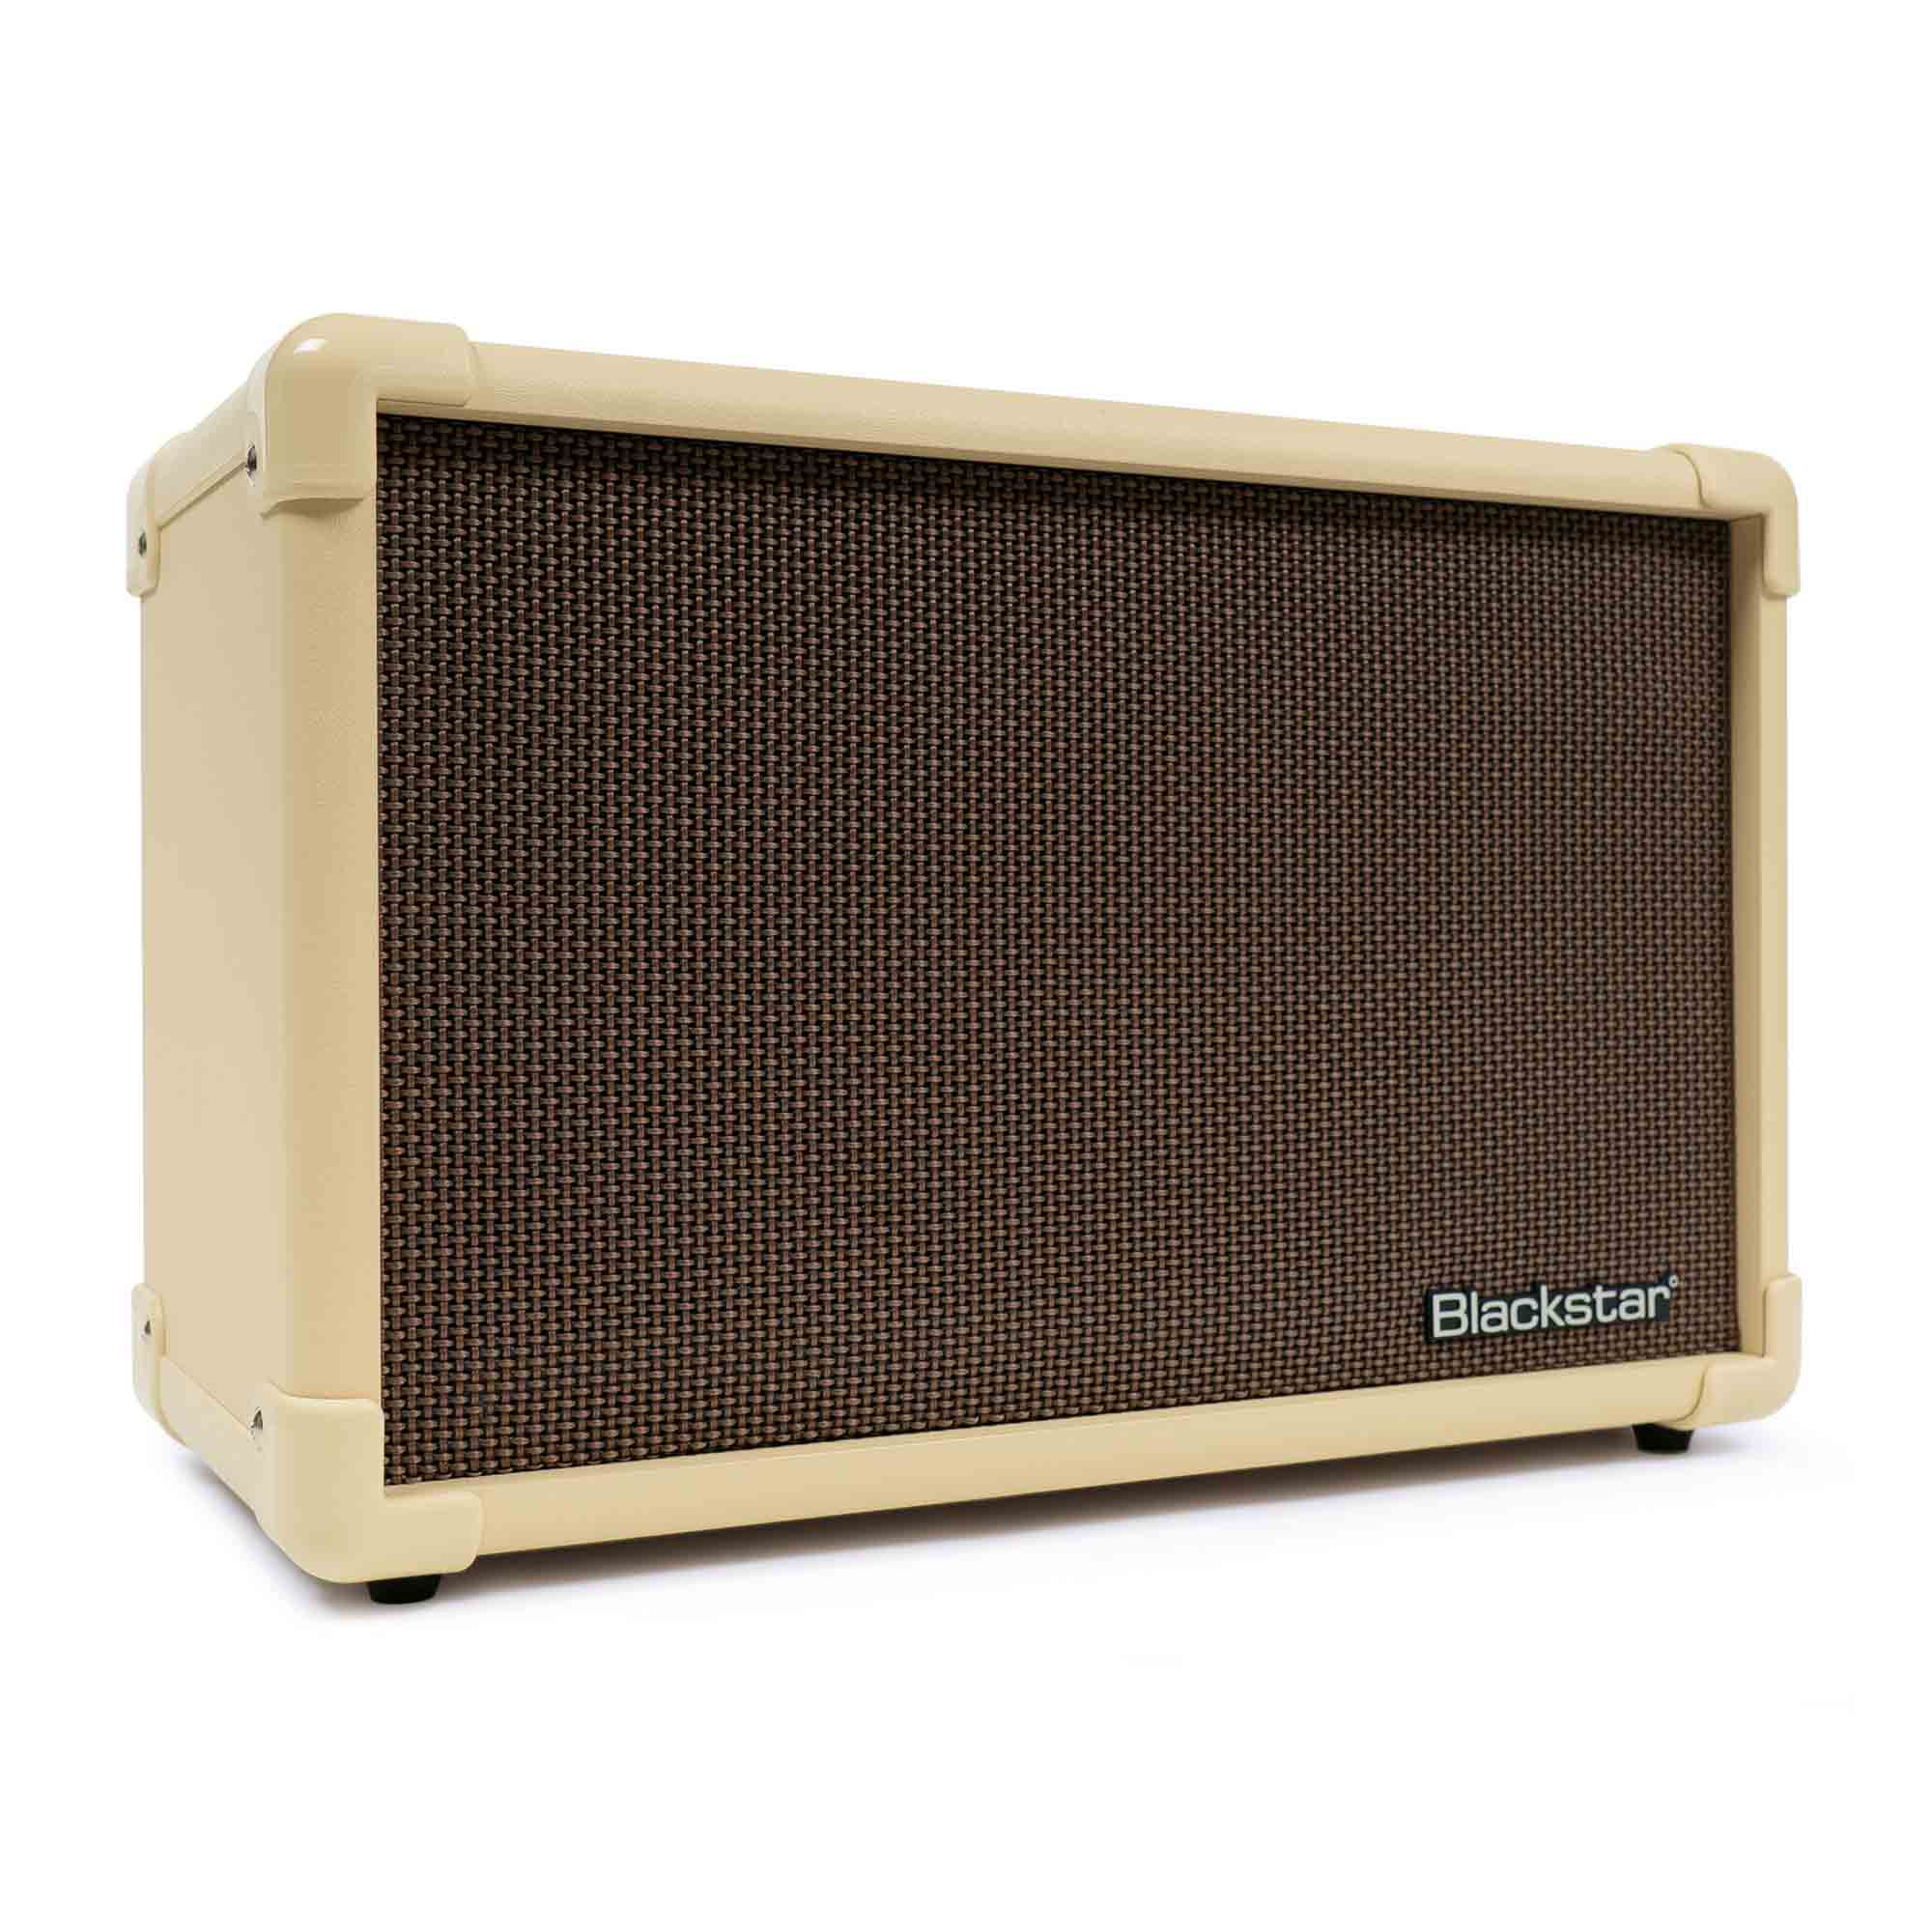 Blackstar Acoustic Core 30 Acoustic Guitar Amp with 2 x 5" Speakers-30 Watts-Music World Academy